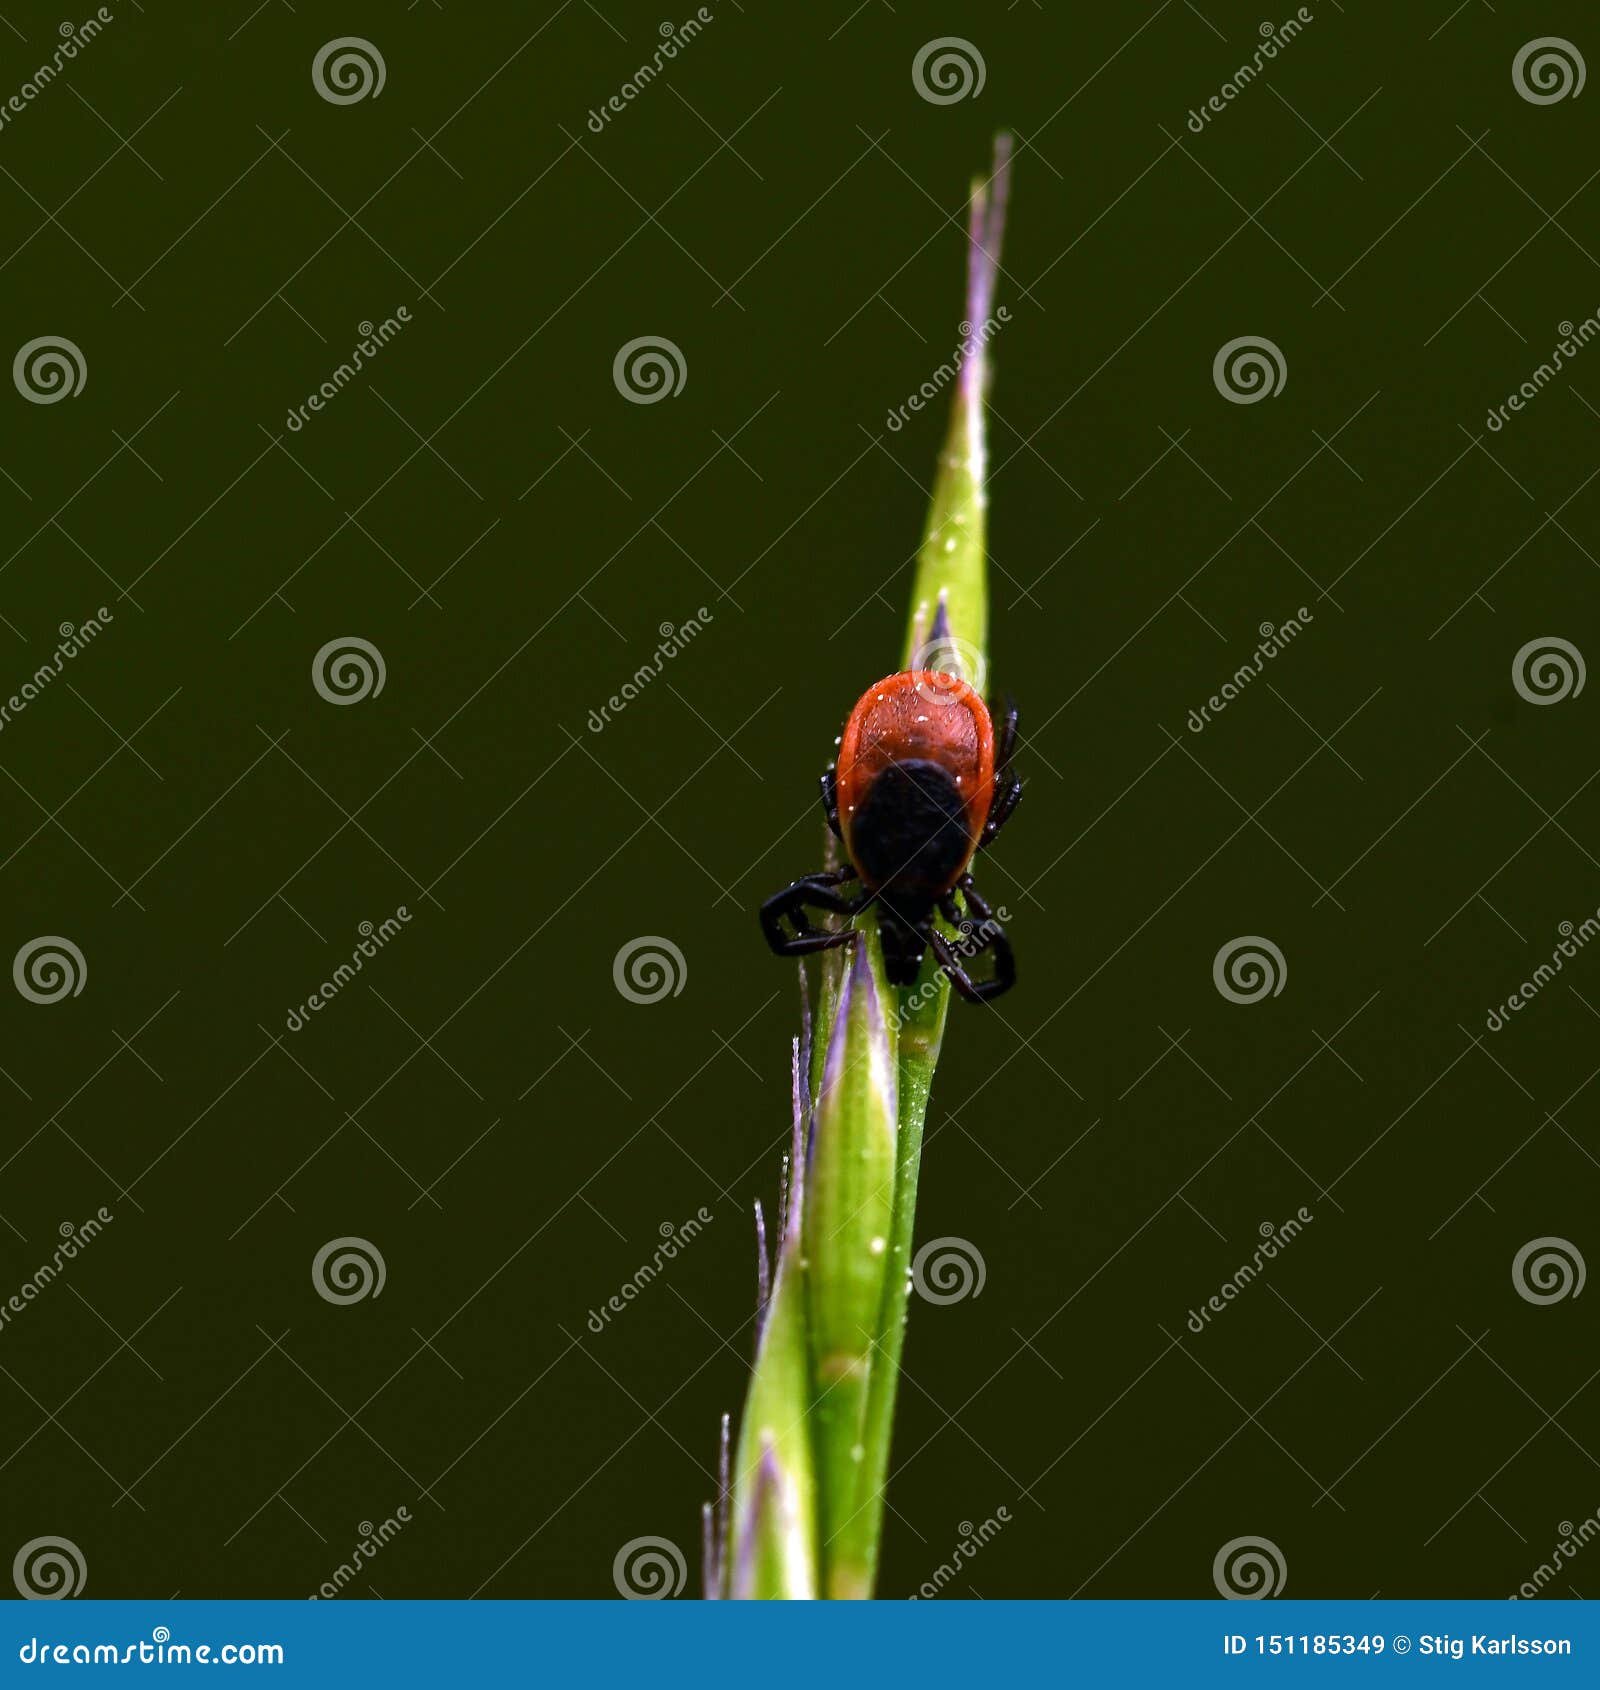 hard tick sits on a blade of grass and waits